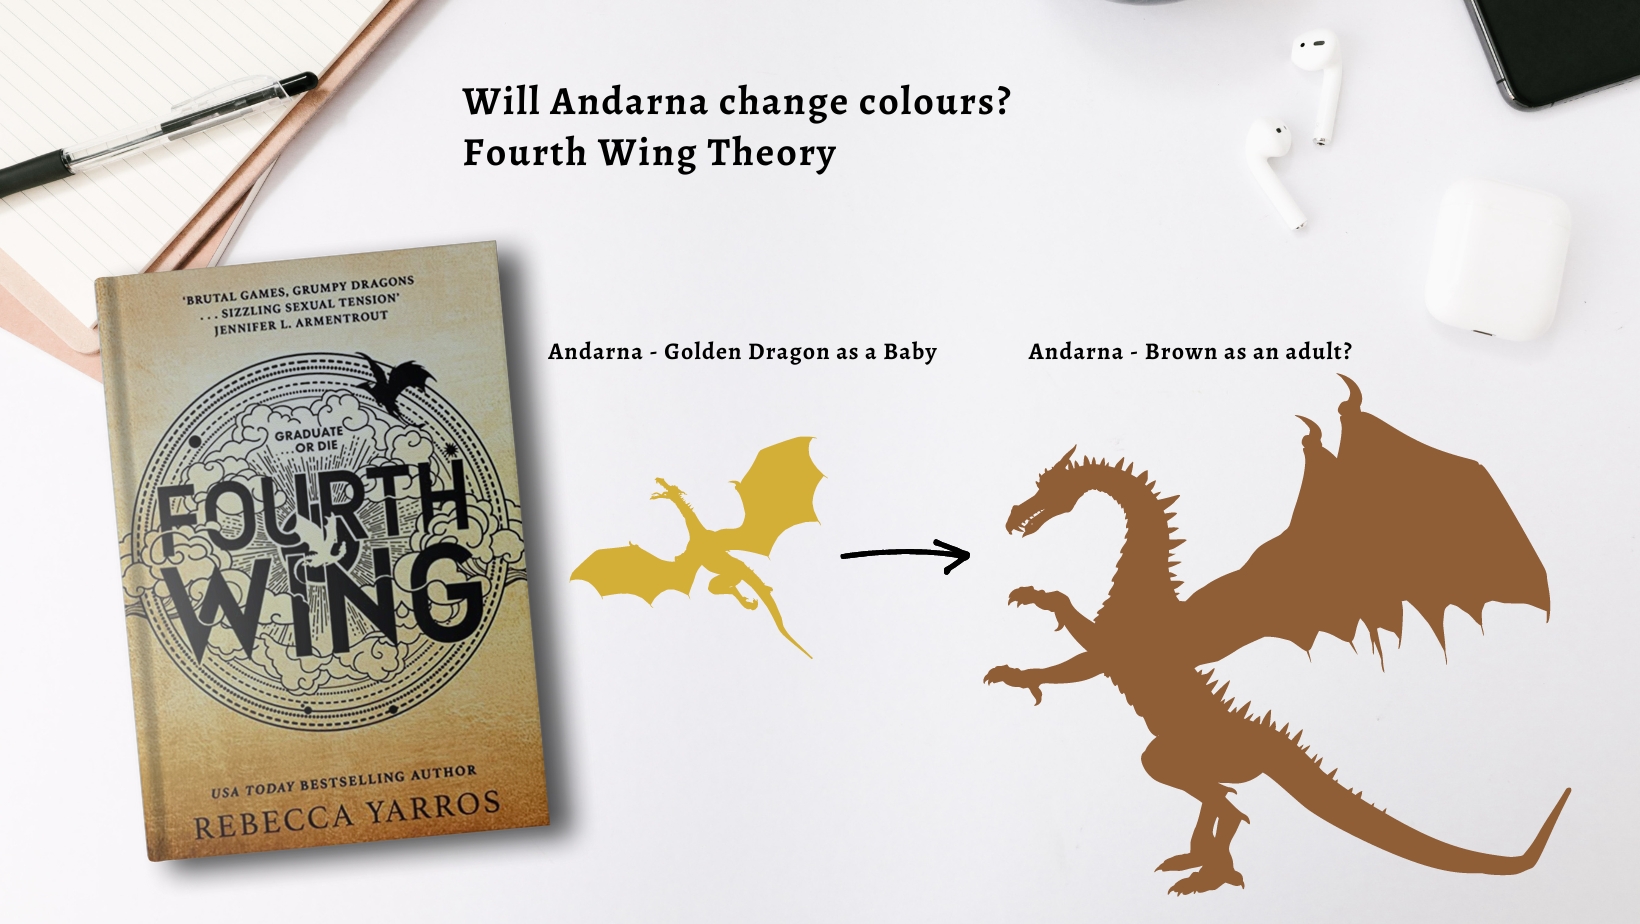 Fourth Wing Theory: Andarna will have a common colour